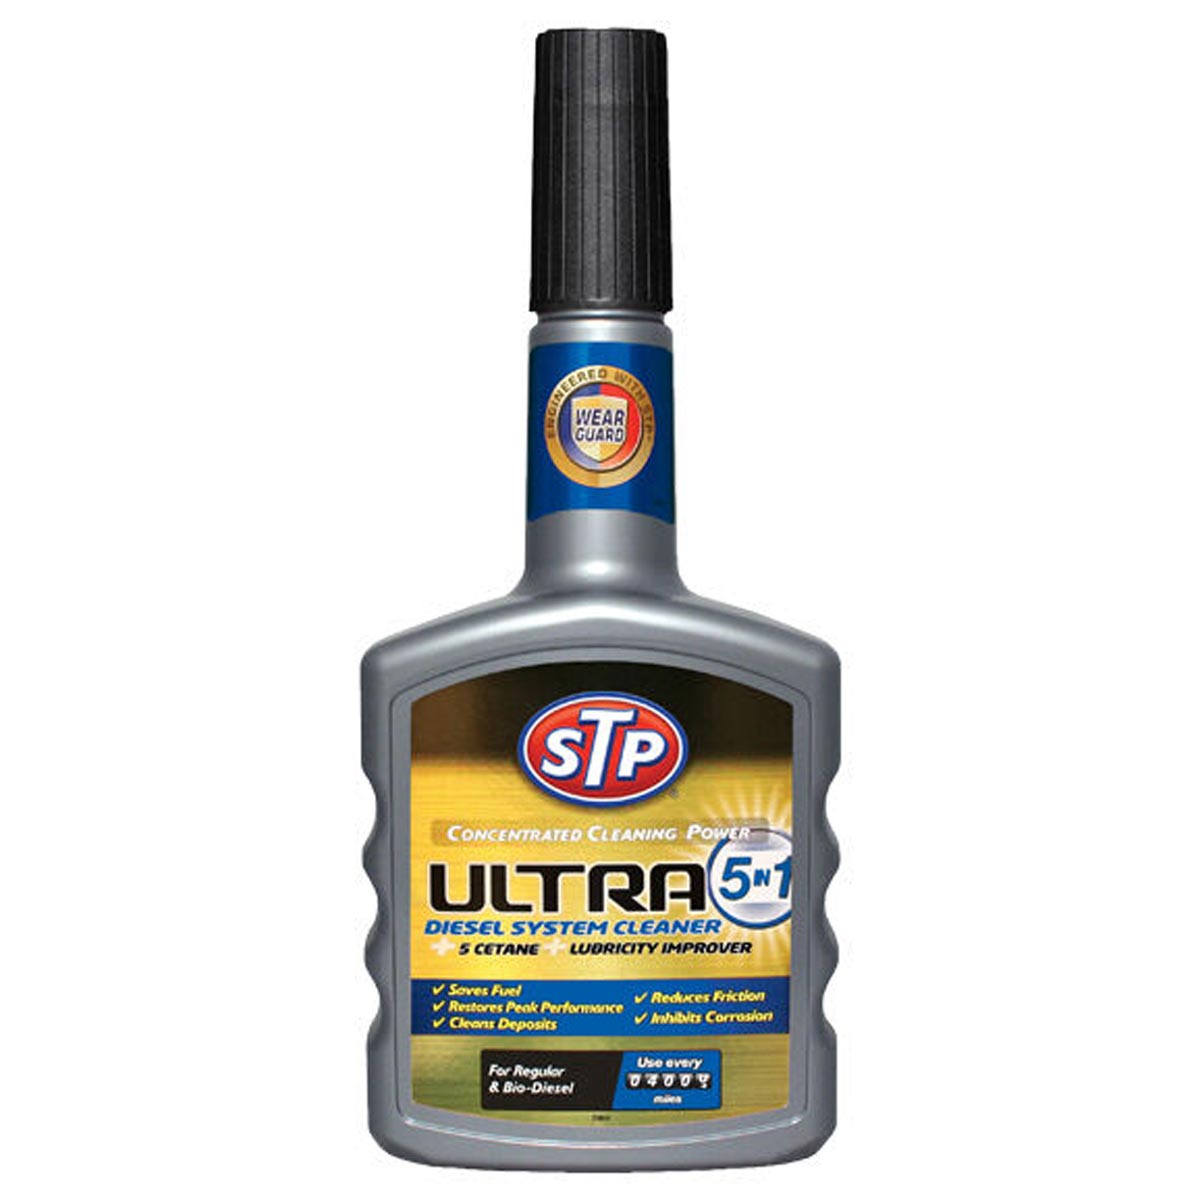 STP 5 in 1 Diesel Ultra System Cleaner: Restore performance & prevent early engine wear